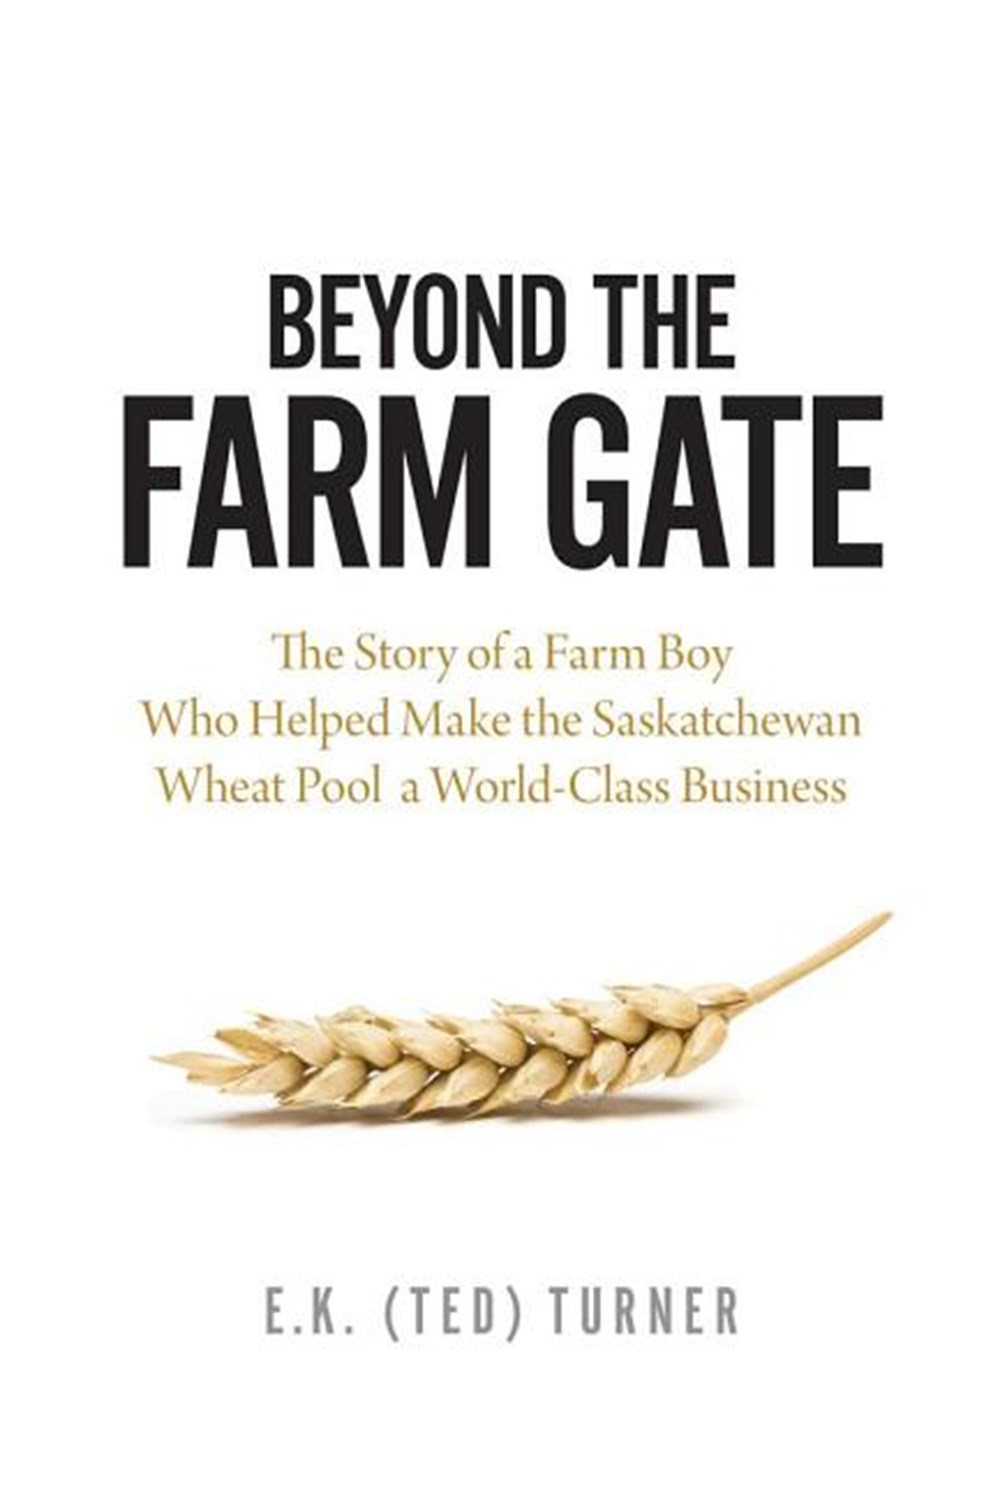 Beyond the Farm Gate The Story of a Farm Boy Who Helped Make the Wheat Pool a World-Class Business